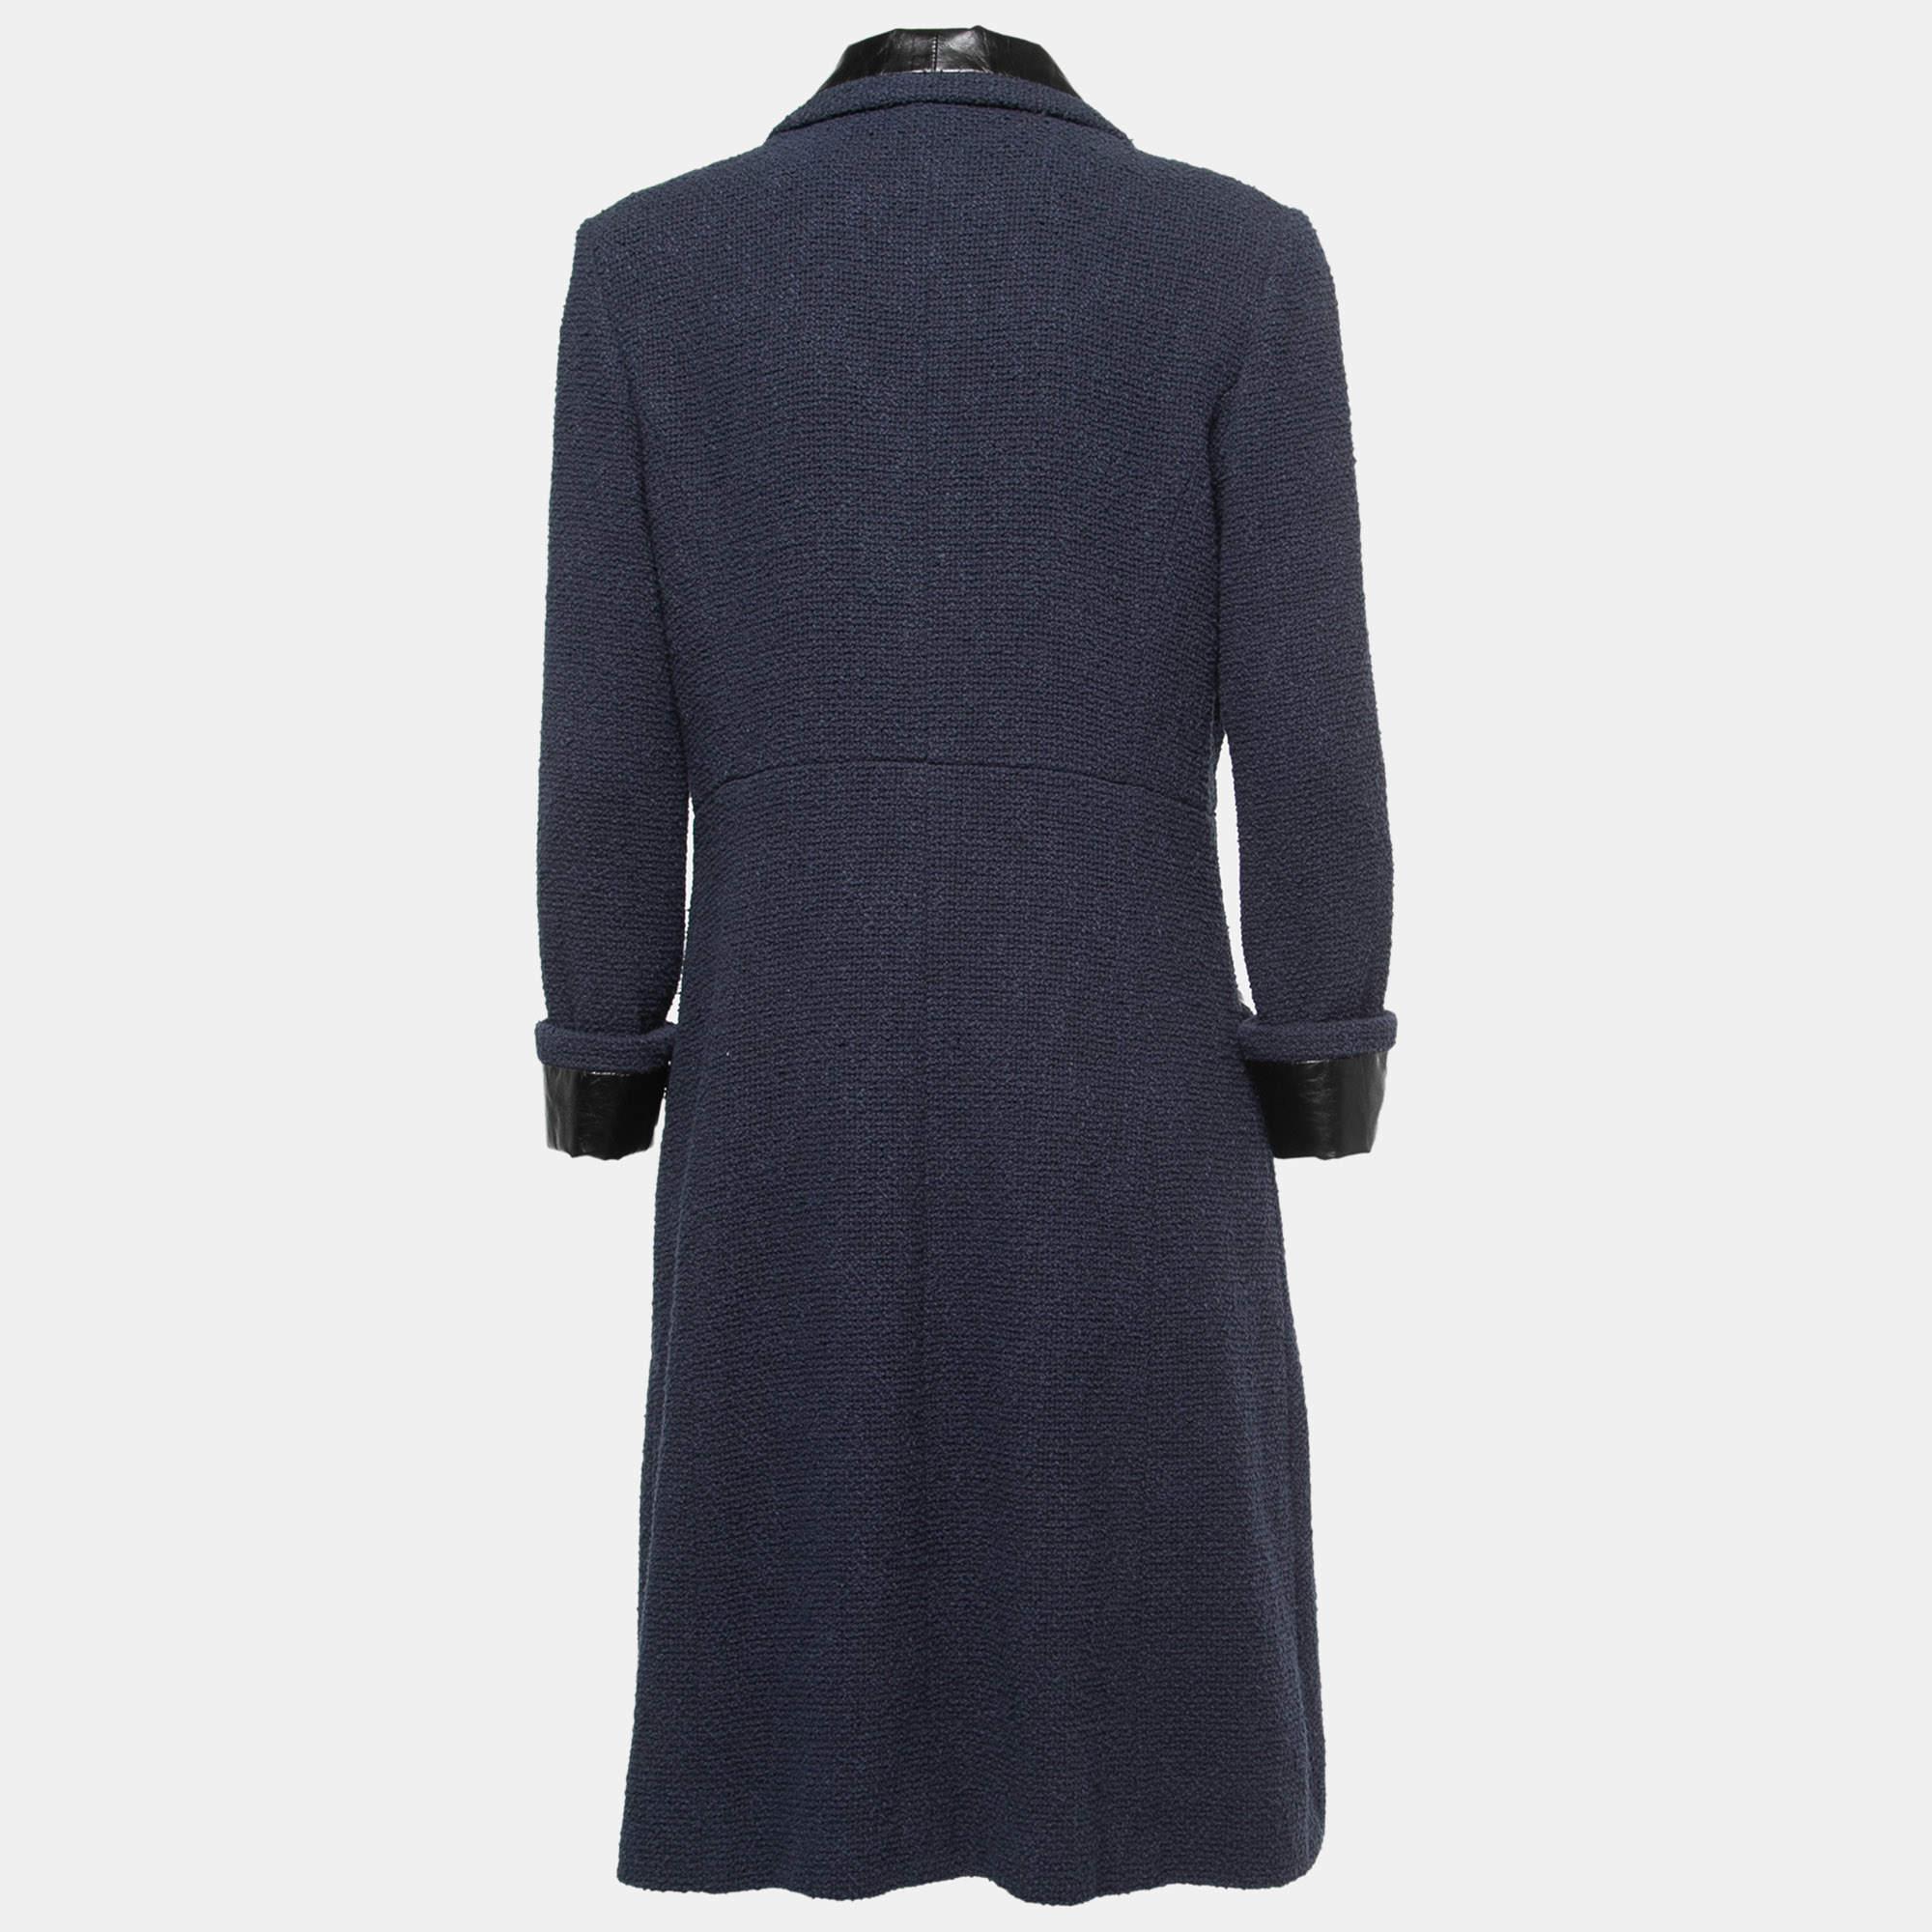 The Chanel coat exudes timeless elegance. Crafted from rich navy terry fabric, it features exquisite calfskin trimmings, adding a touch of luxury. With a mid-length silhouette, it combines comfort and sophistication, making it a versatile and